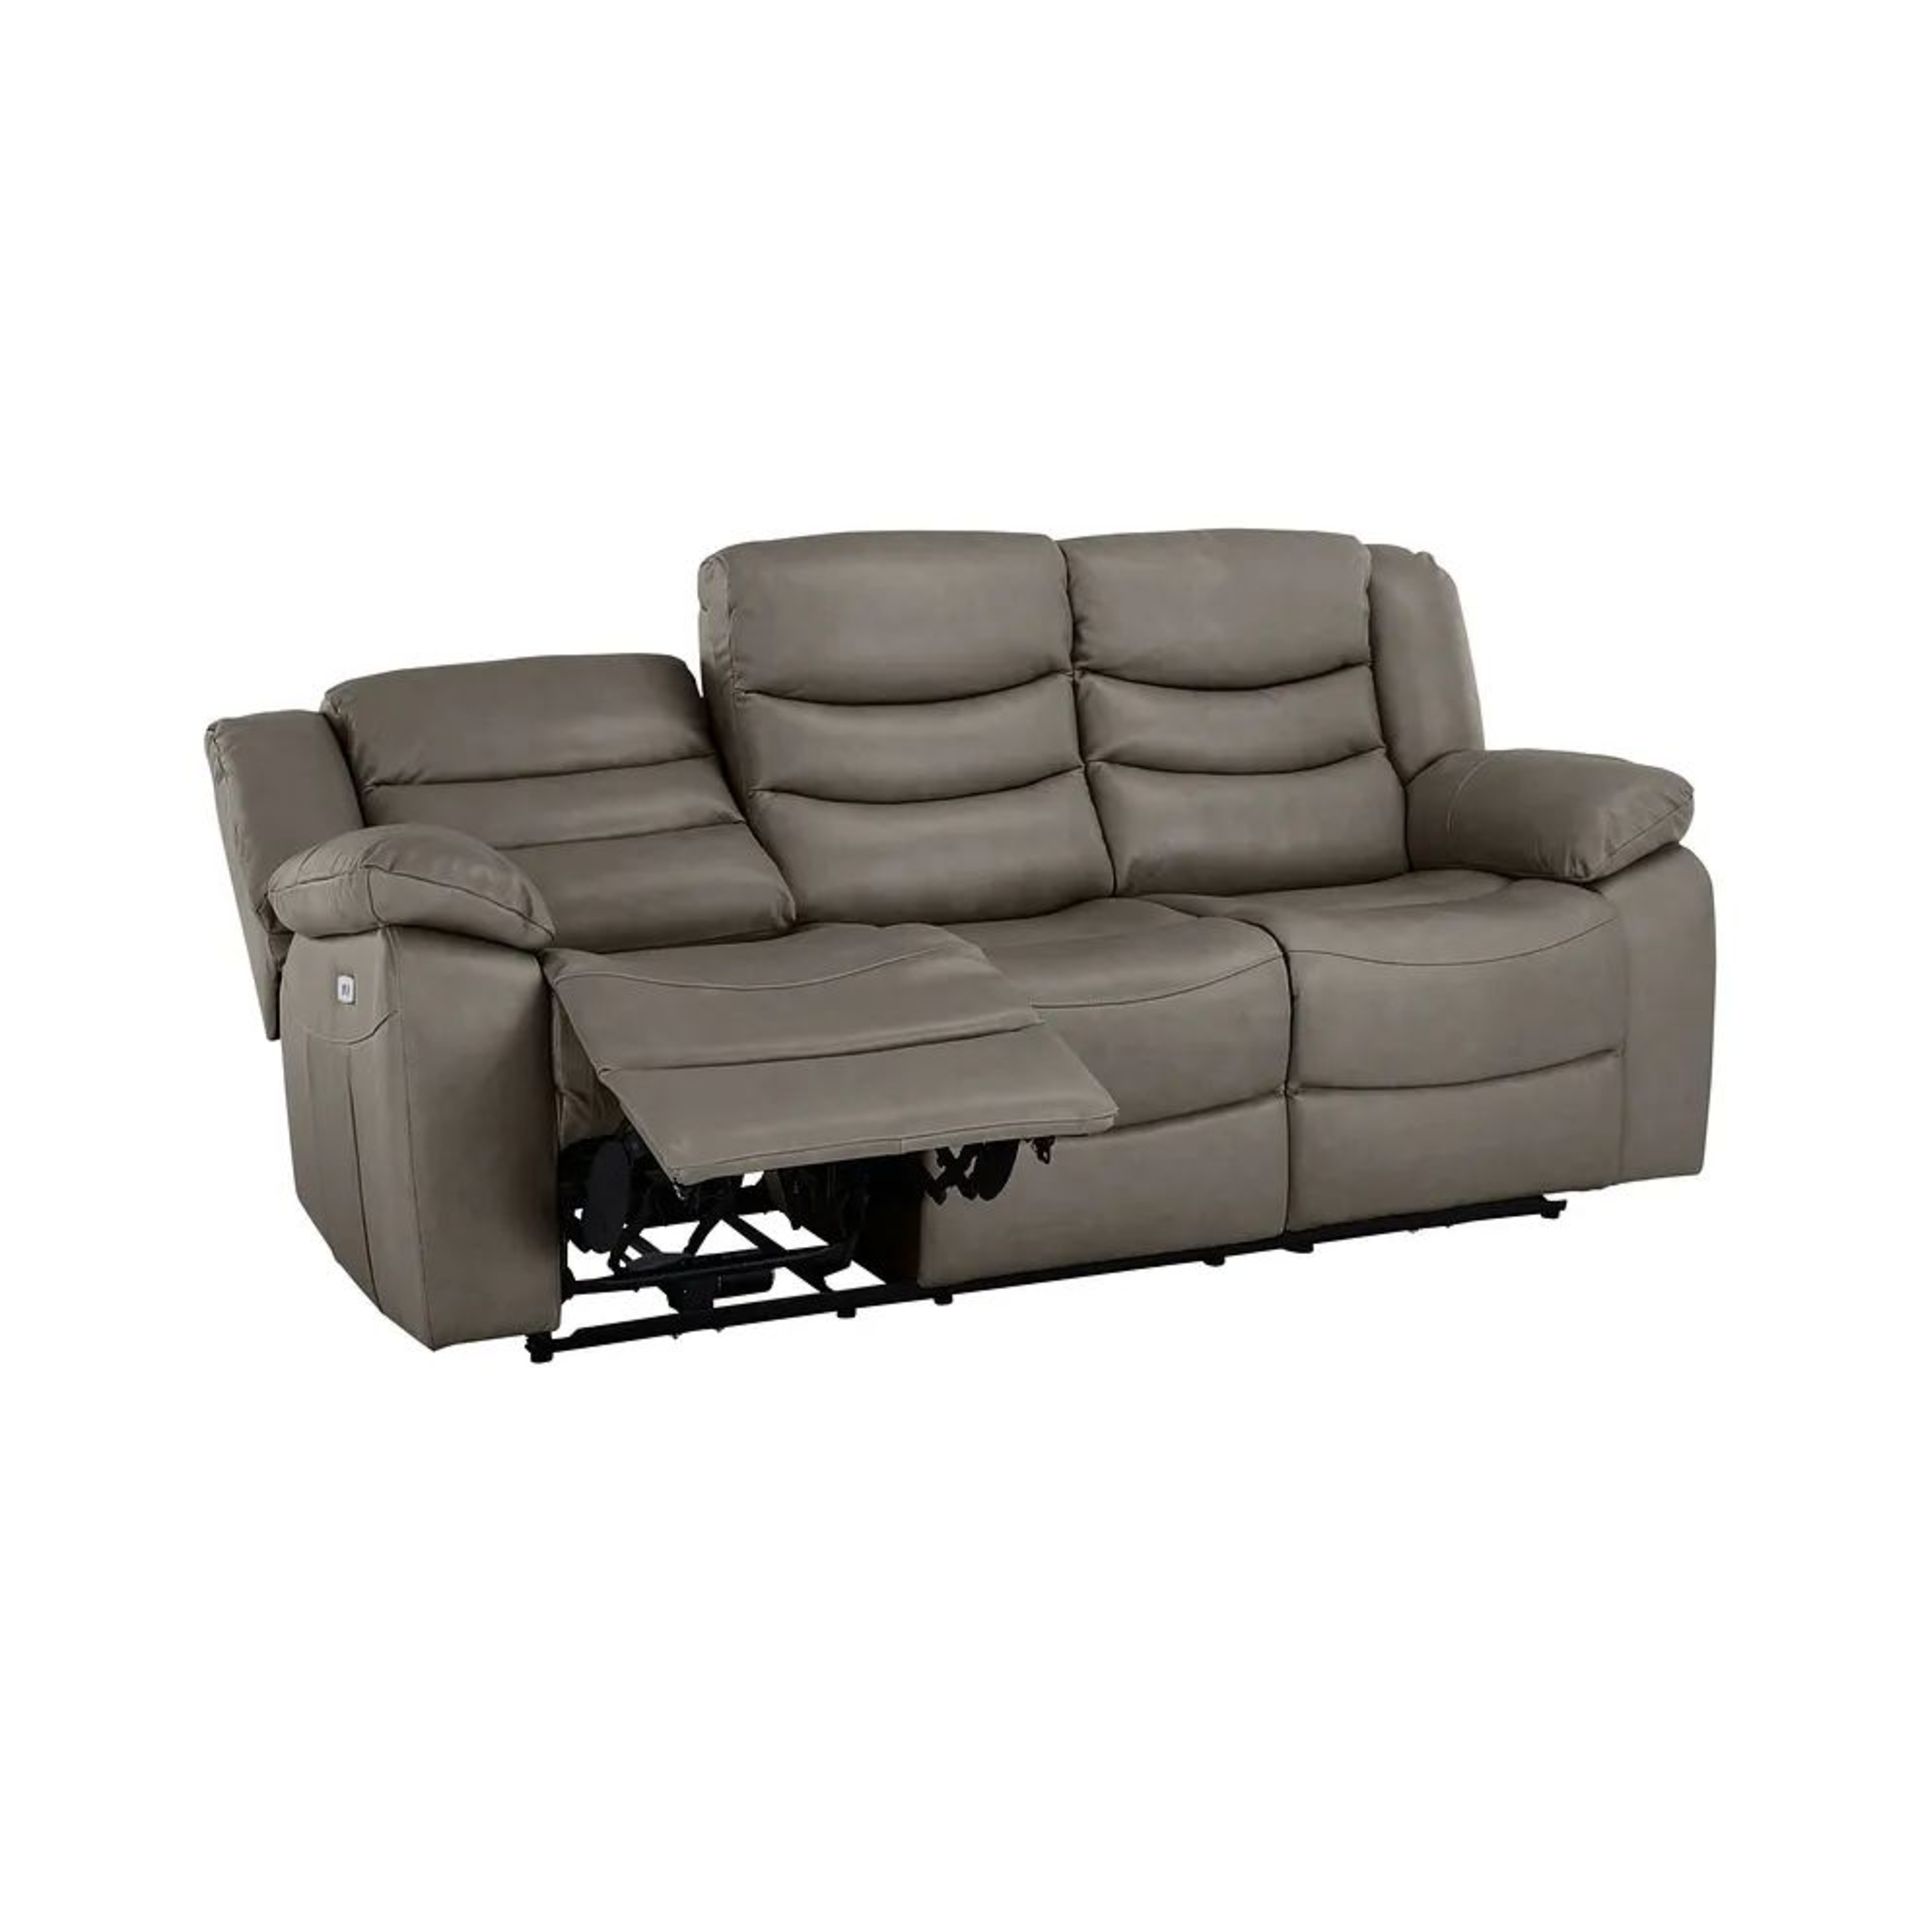 BRAND NEW MARLOW 3 Seater Electric Recliner Sofa - DARK GREY LEATHER. RRP £1849. Our Marlow - Image 4 of 11